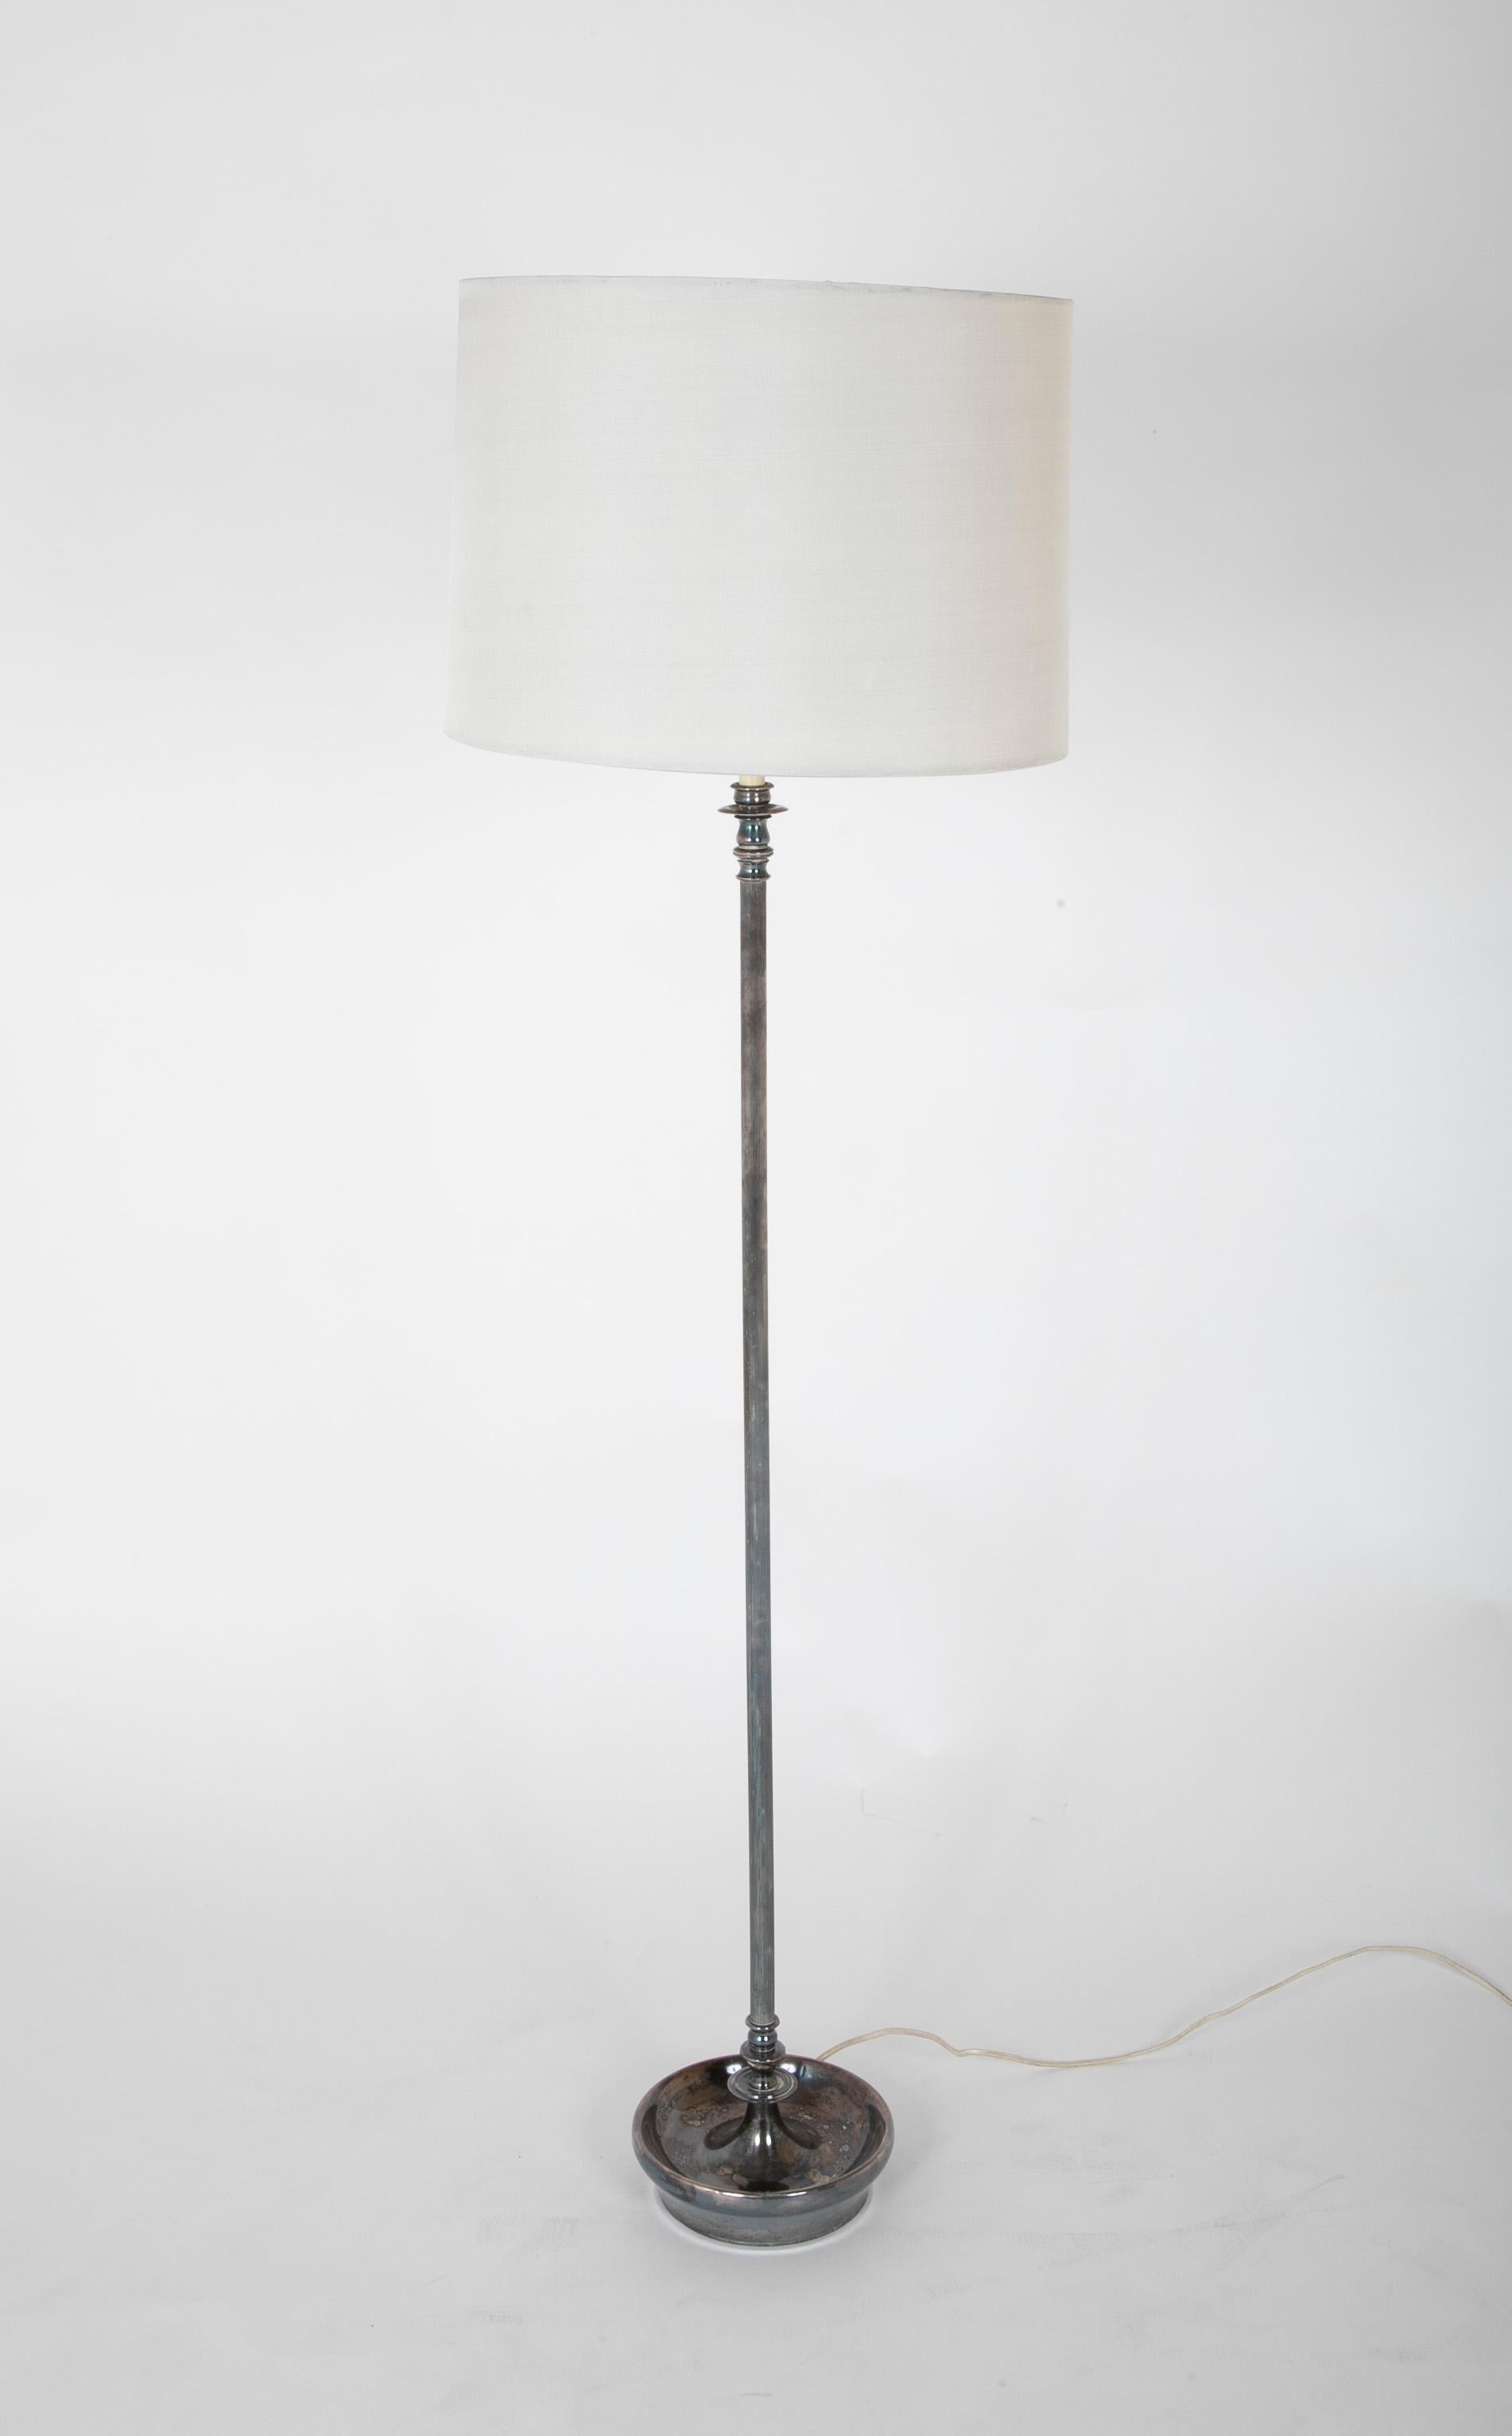 Silver standing lamp.